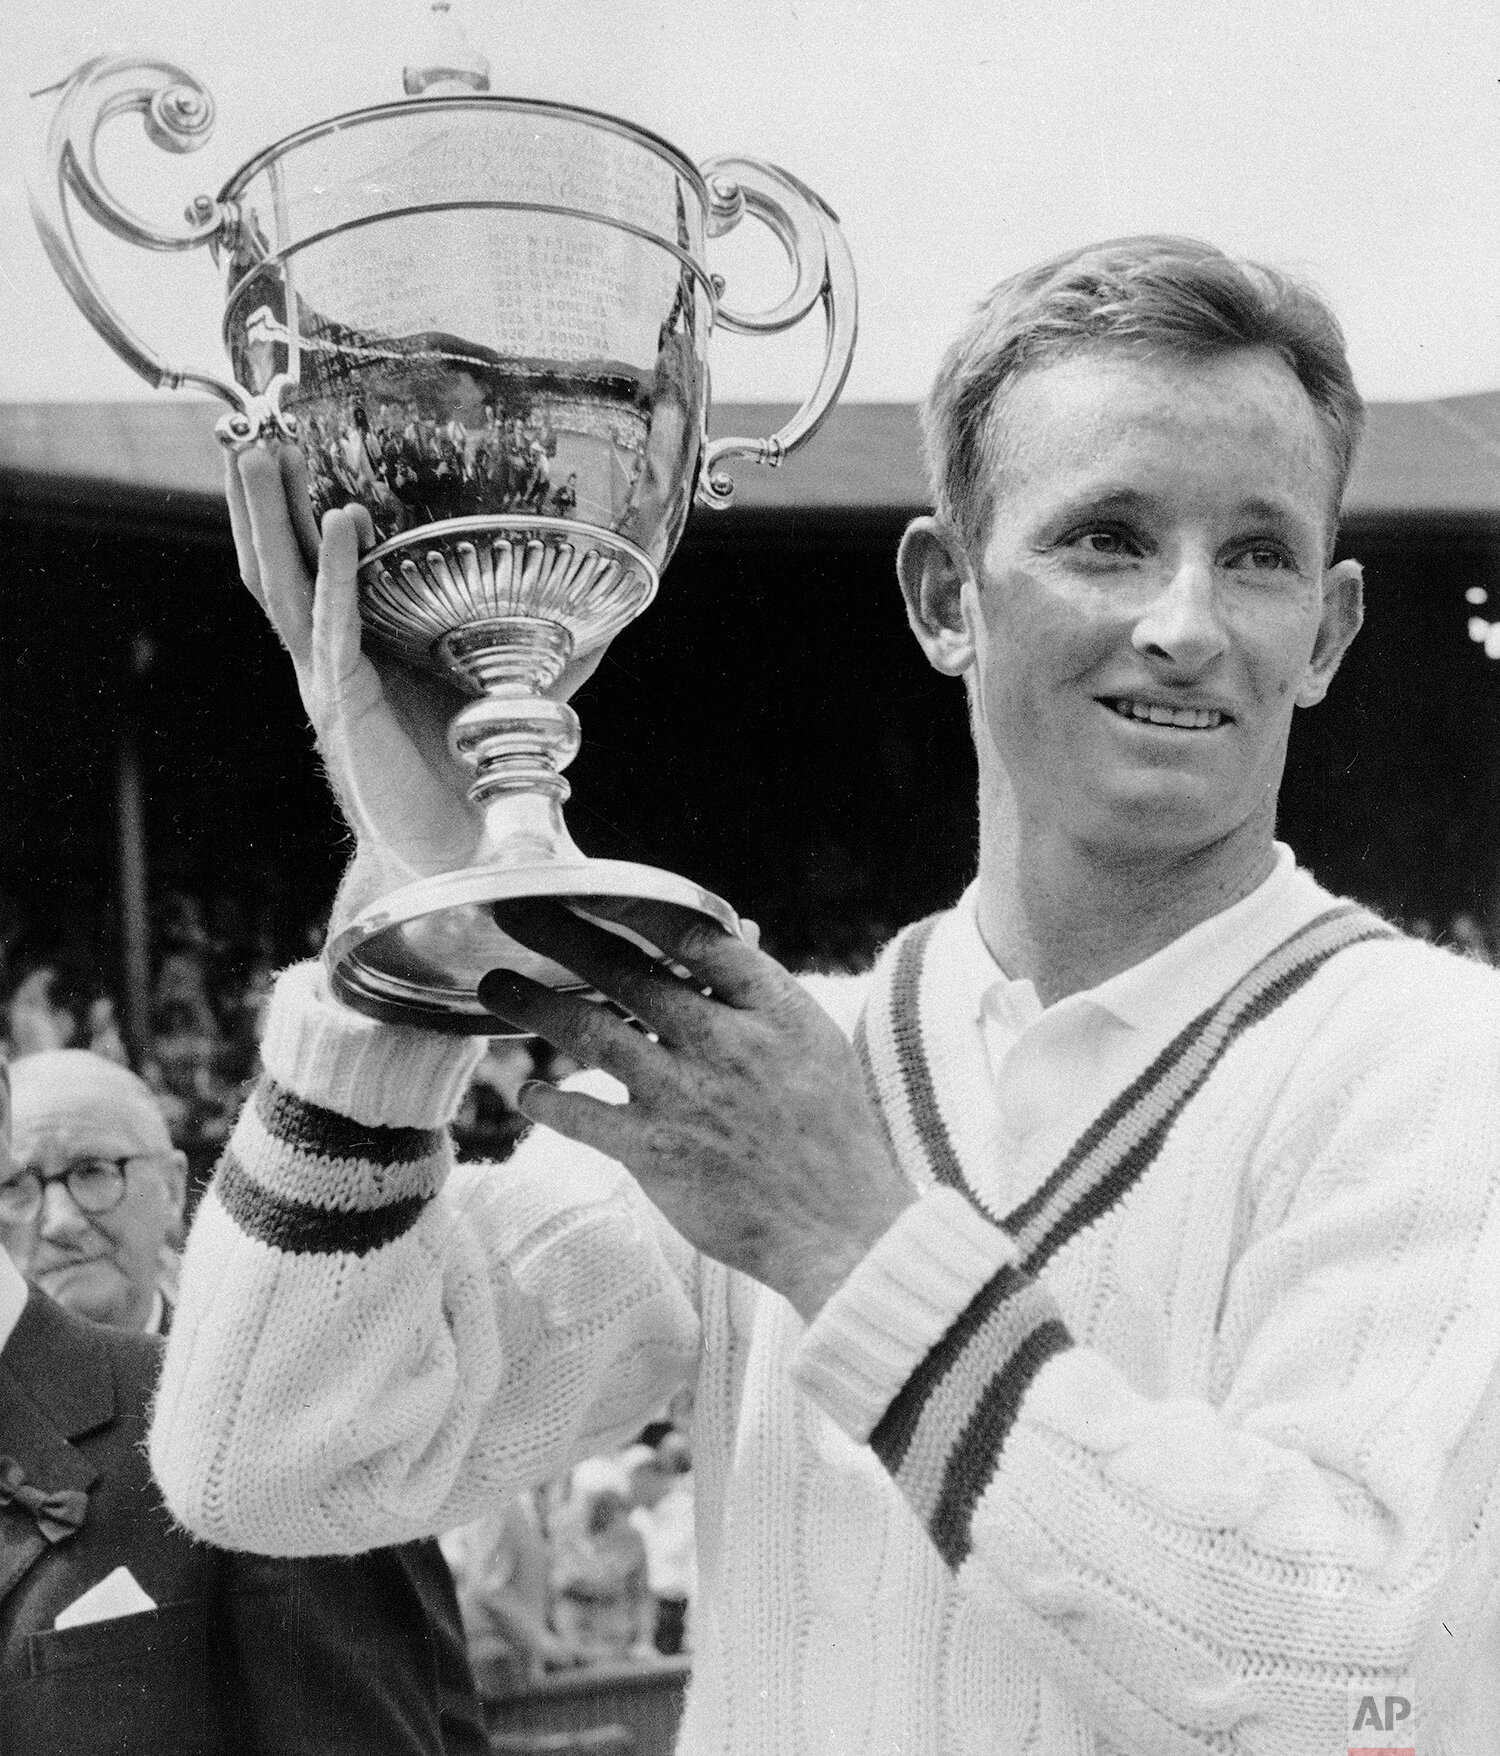  Rod Laver of Australia holds up the men's singles trophy he won in the All England Lawn Tennis Championship at Wimbledon, July 7, 1961.  (AP Photo) 